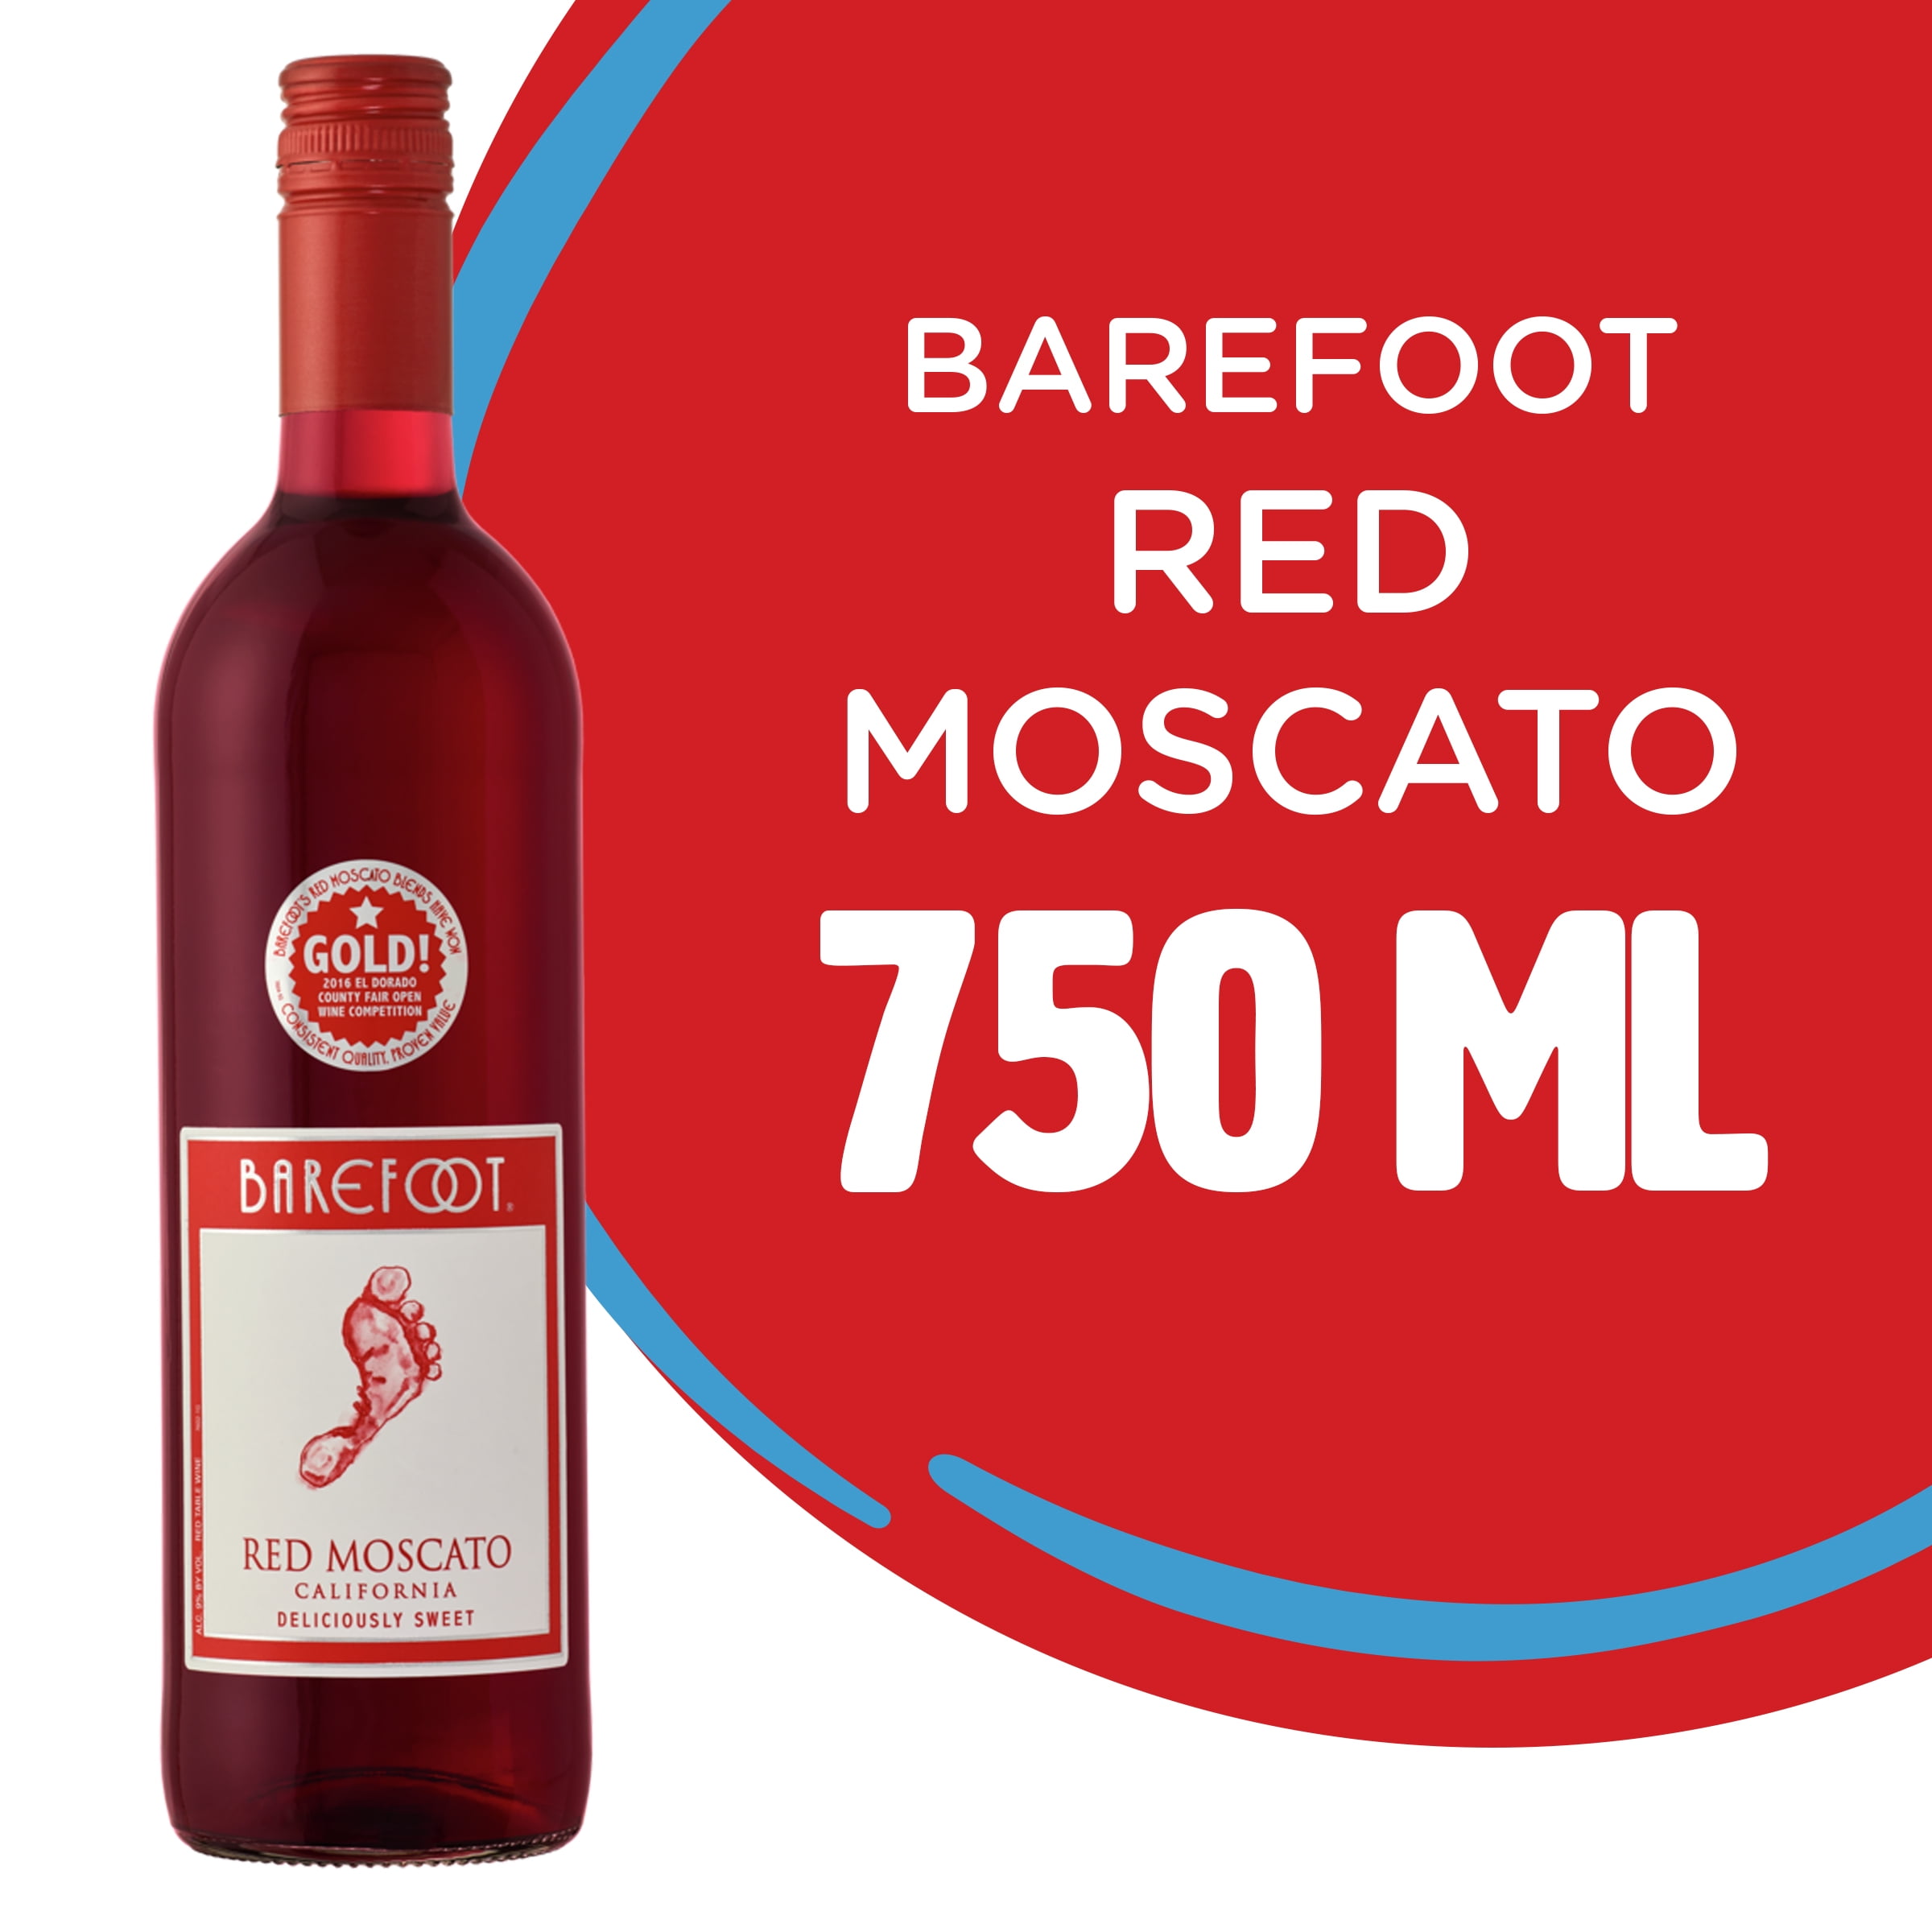 Barefoot Red Moscato Sweet Red Wine 750ml Walmart.com